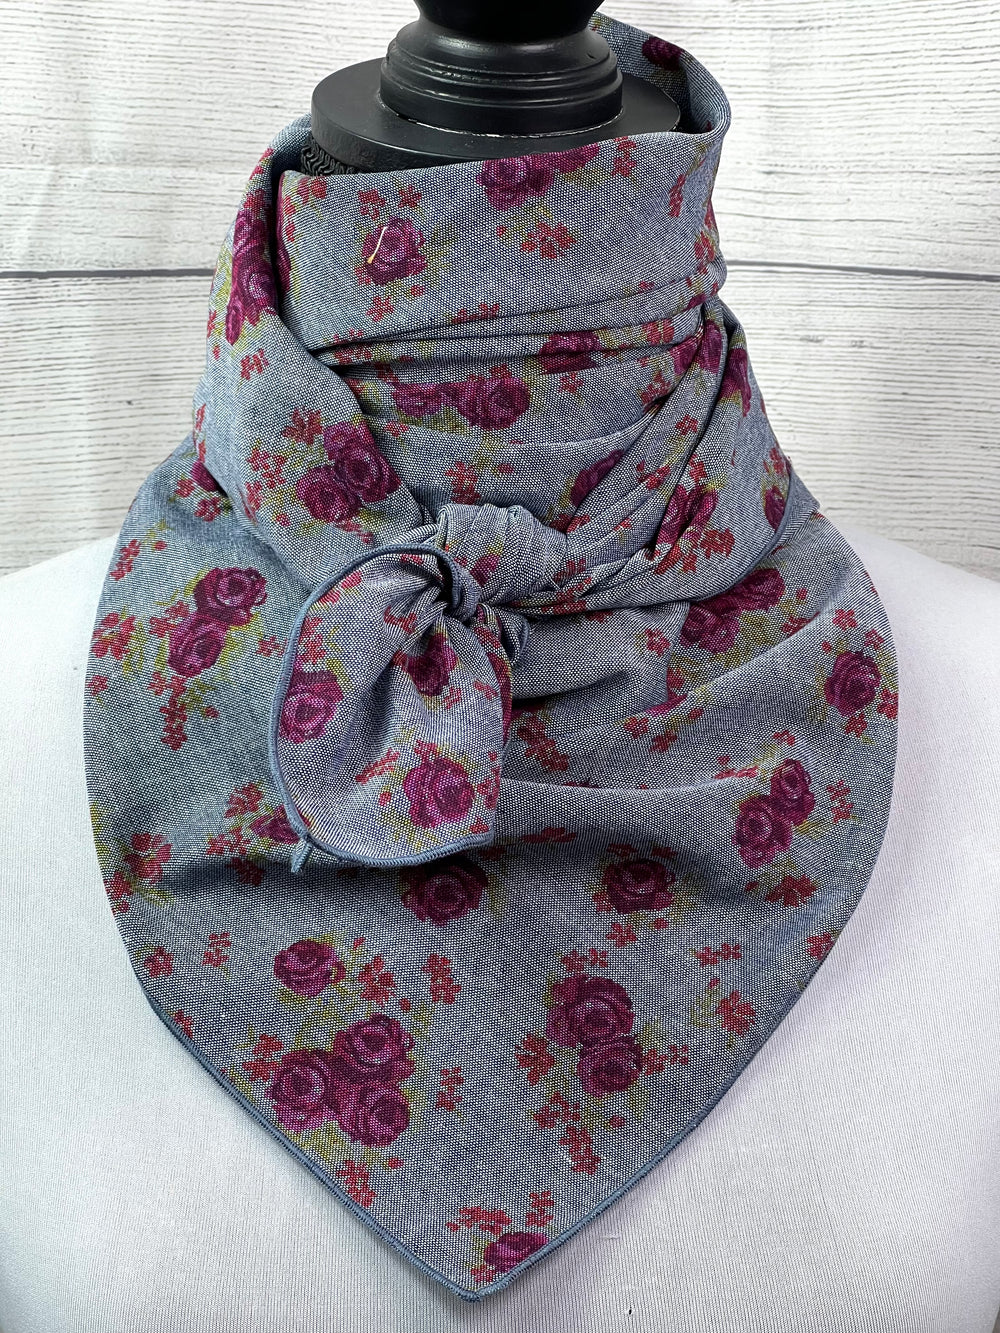 The Rose Chambray Cotton Rag